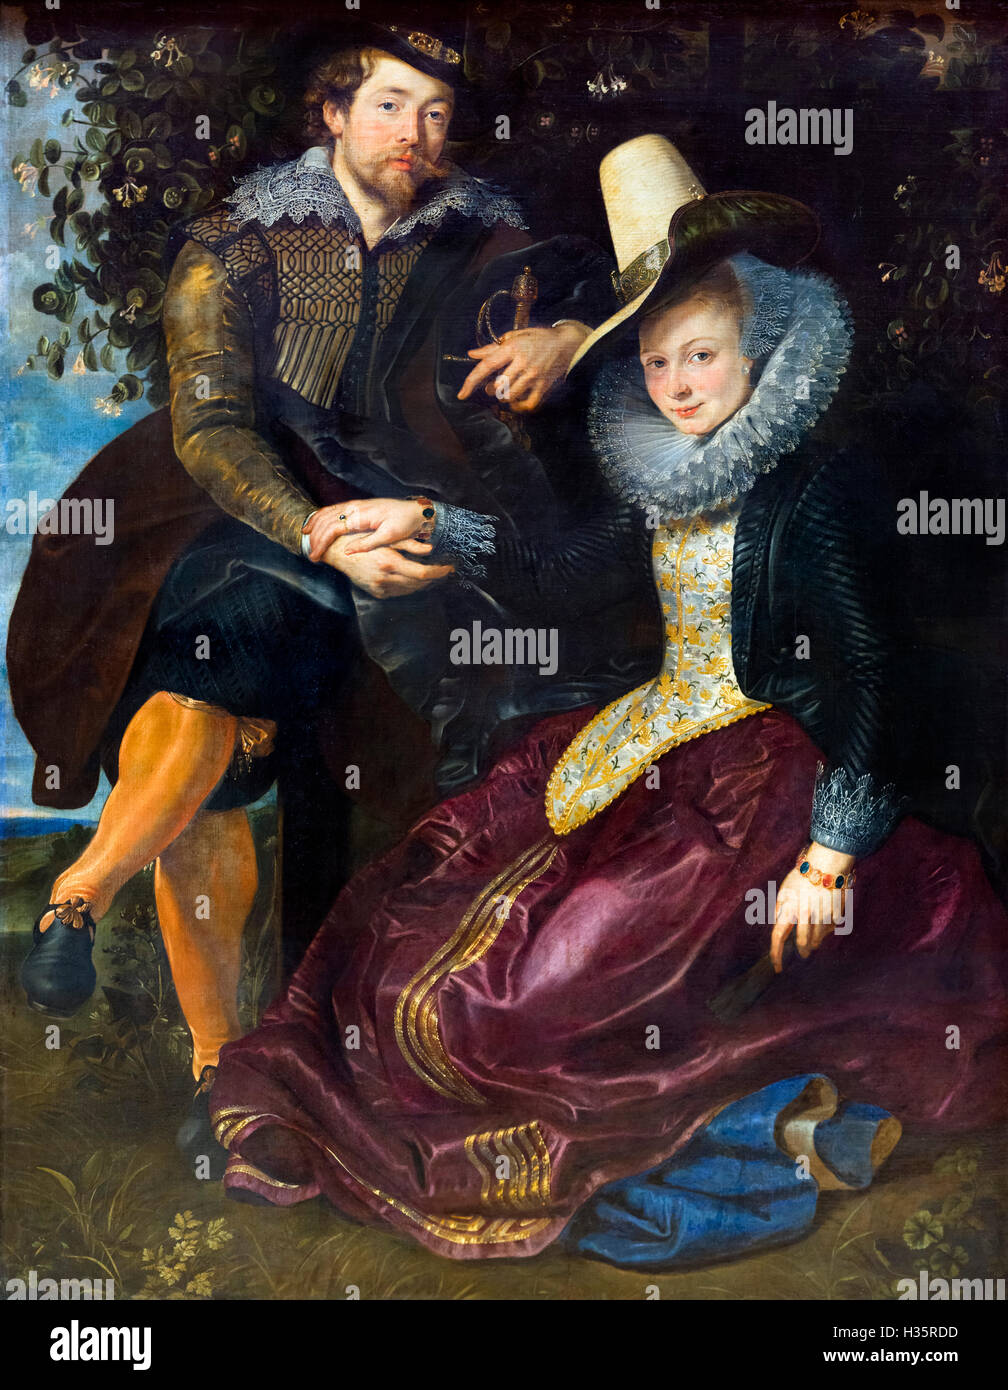 The Honeysuckle Bower, a self-portrait of the painter Peter Paul Rubens (1577-1640) and his first wife, Isabella Brant (1591-1626). Oil on canvas, c.1609. Stock Photo